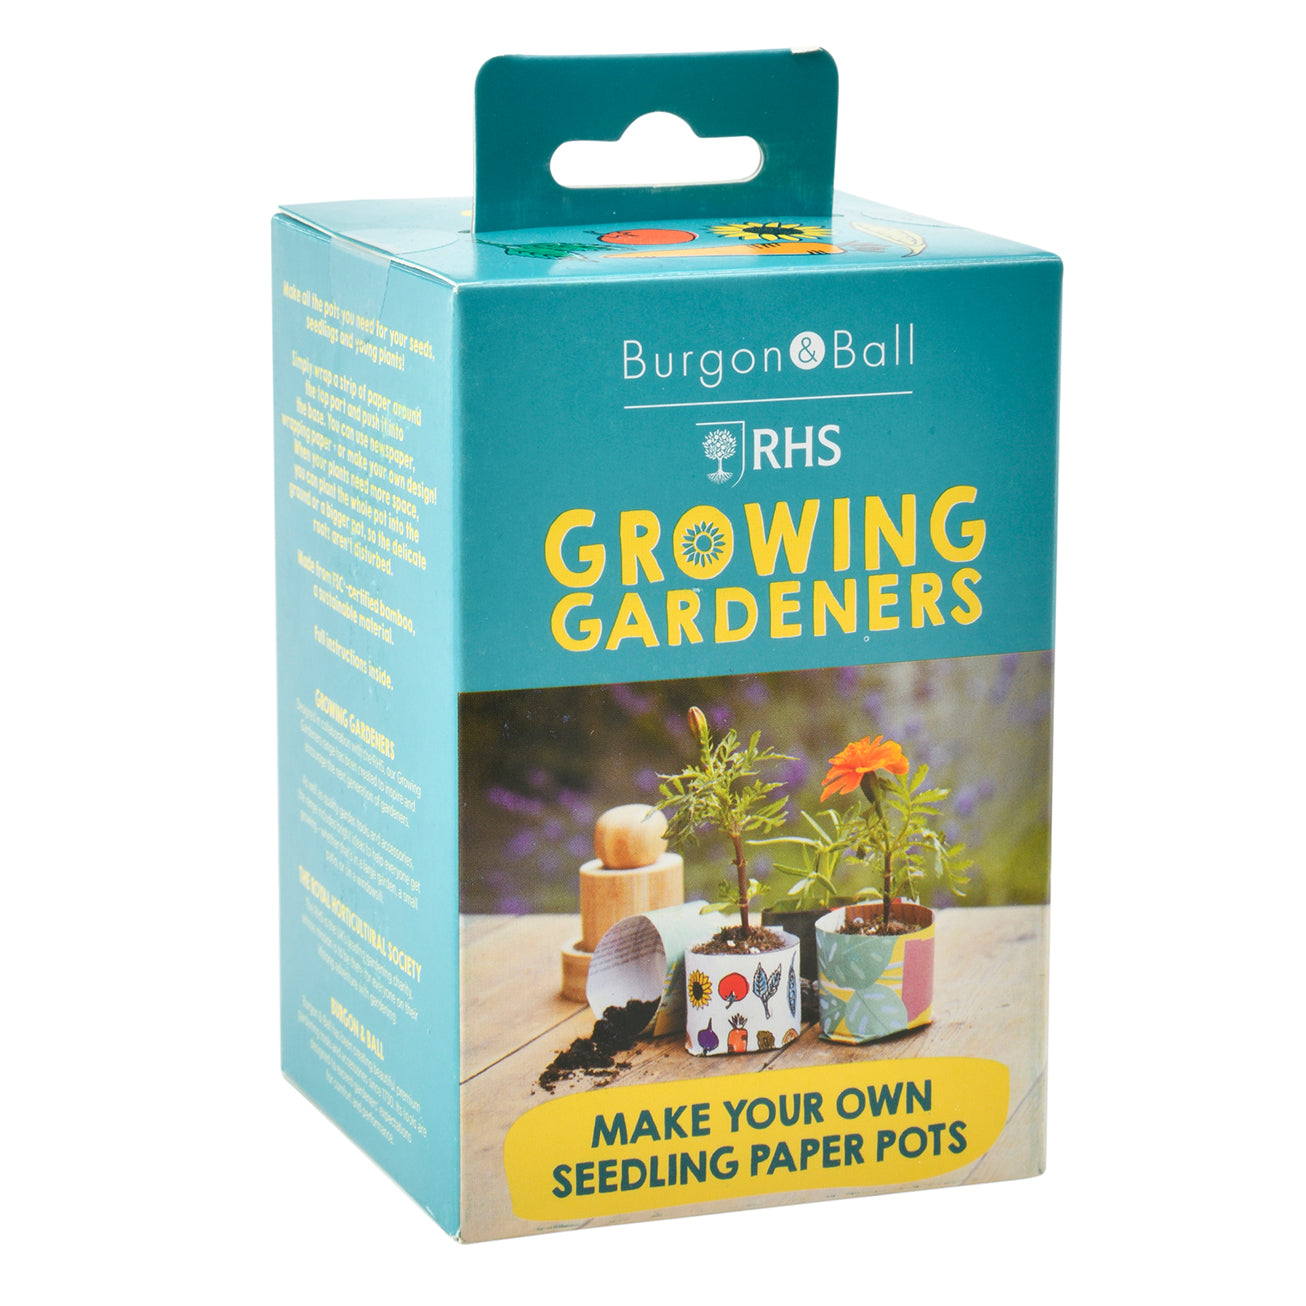 Make Your Own Seedling Paper Pots - RHS Growing Gardeners (Box)